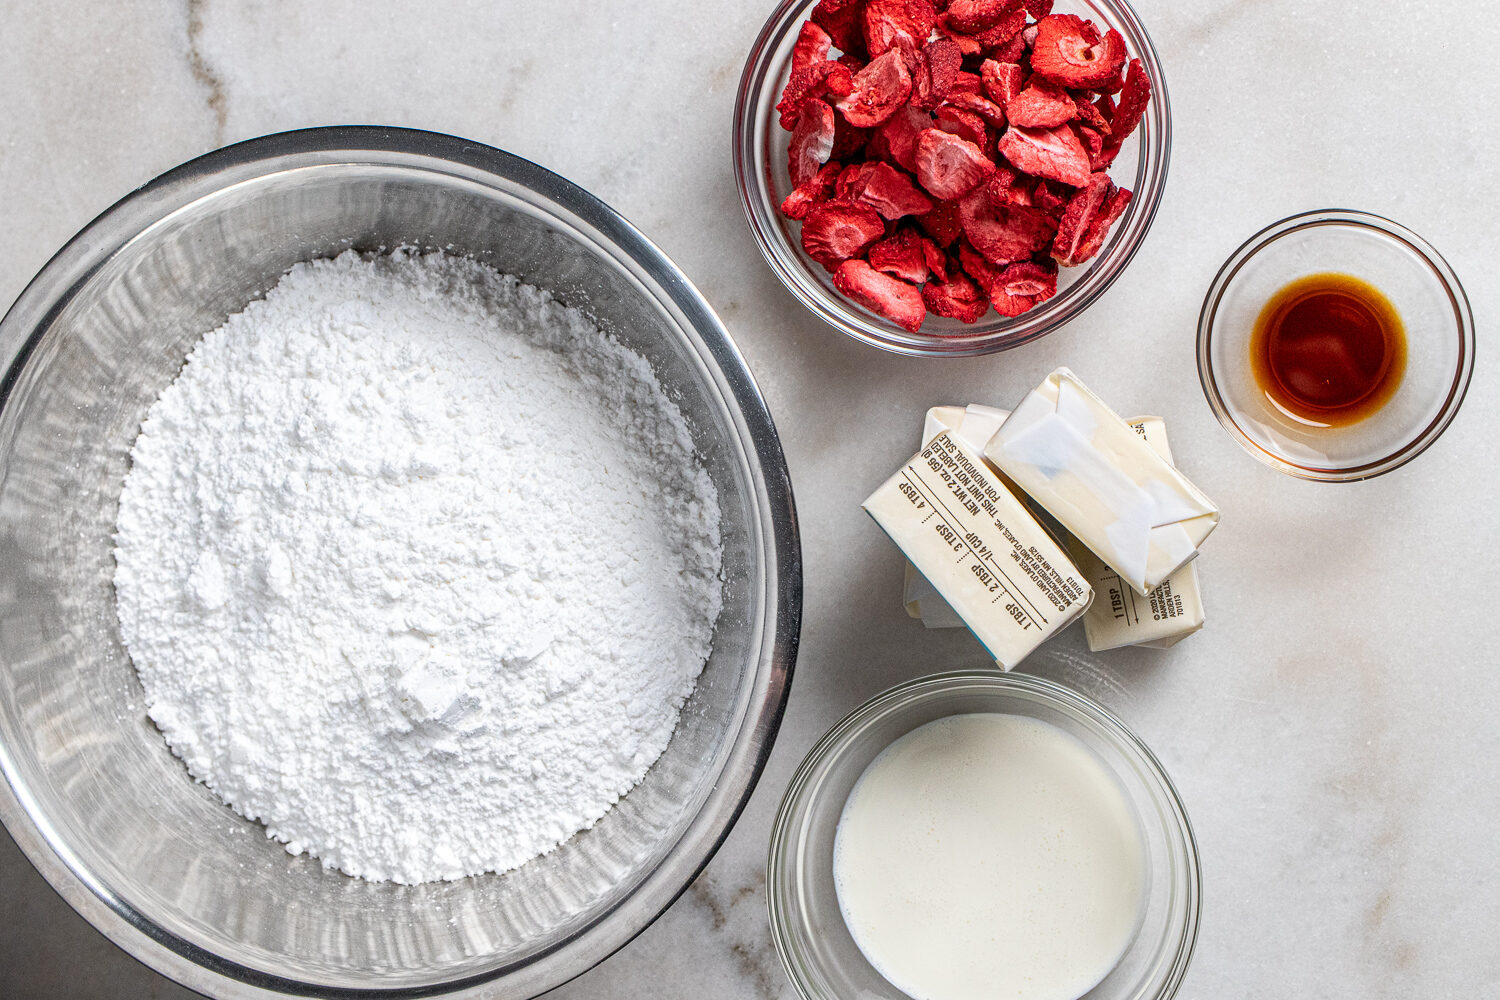 Ingredients for strawberry buttercream